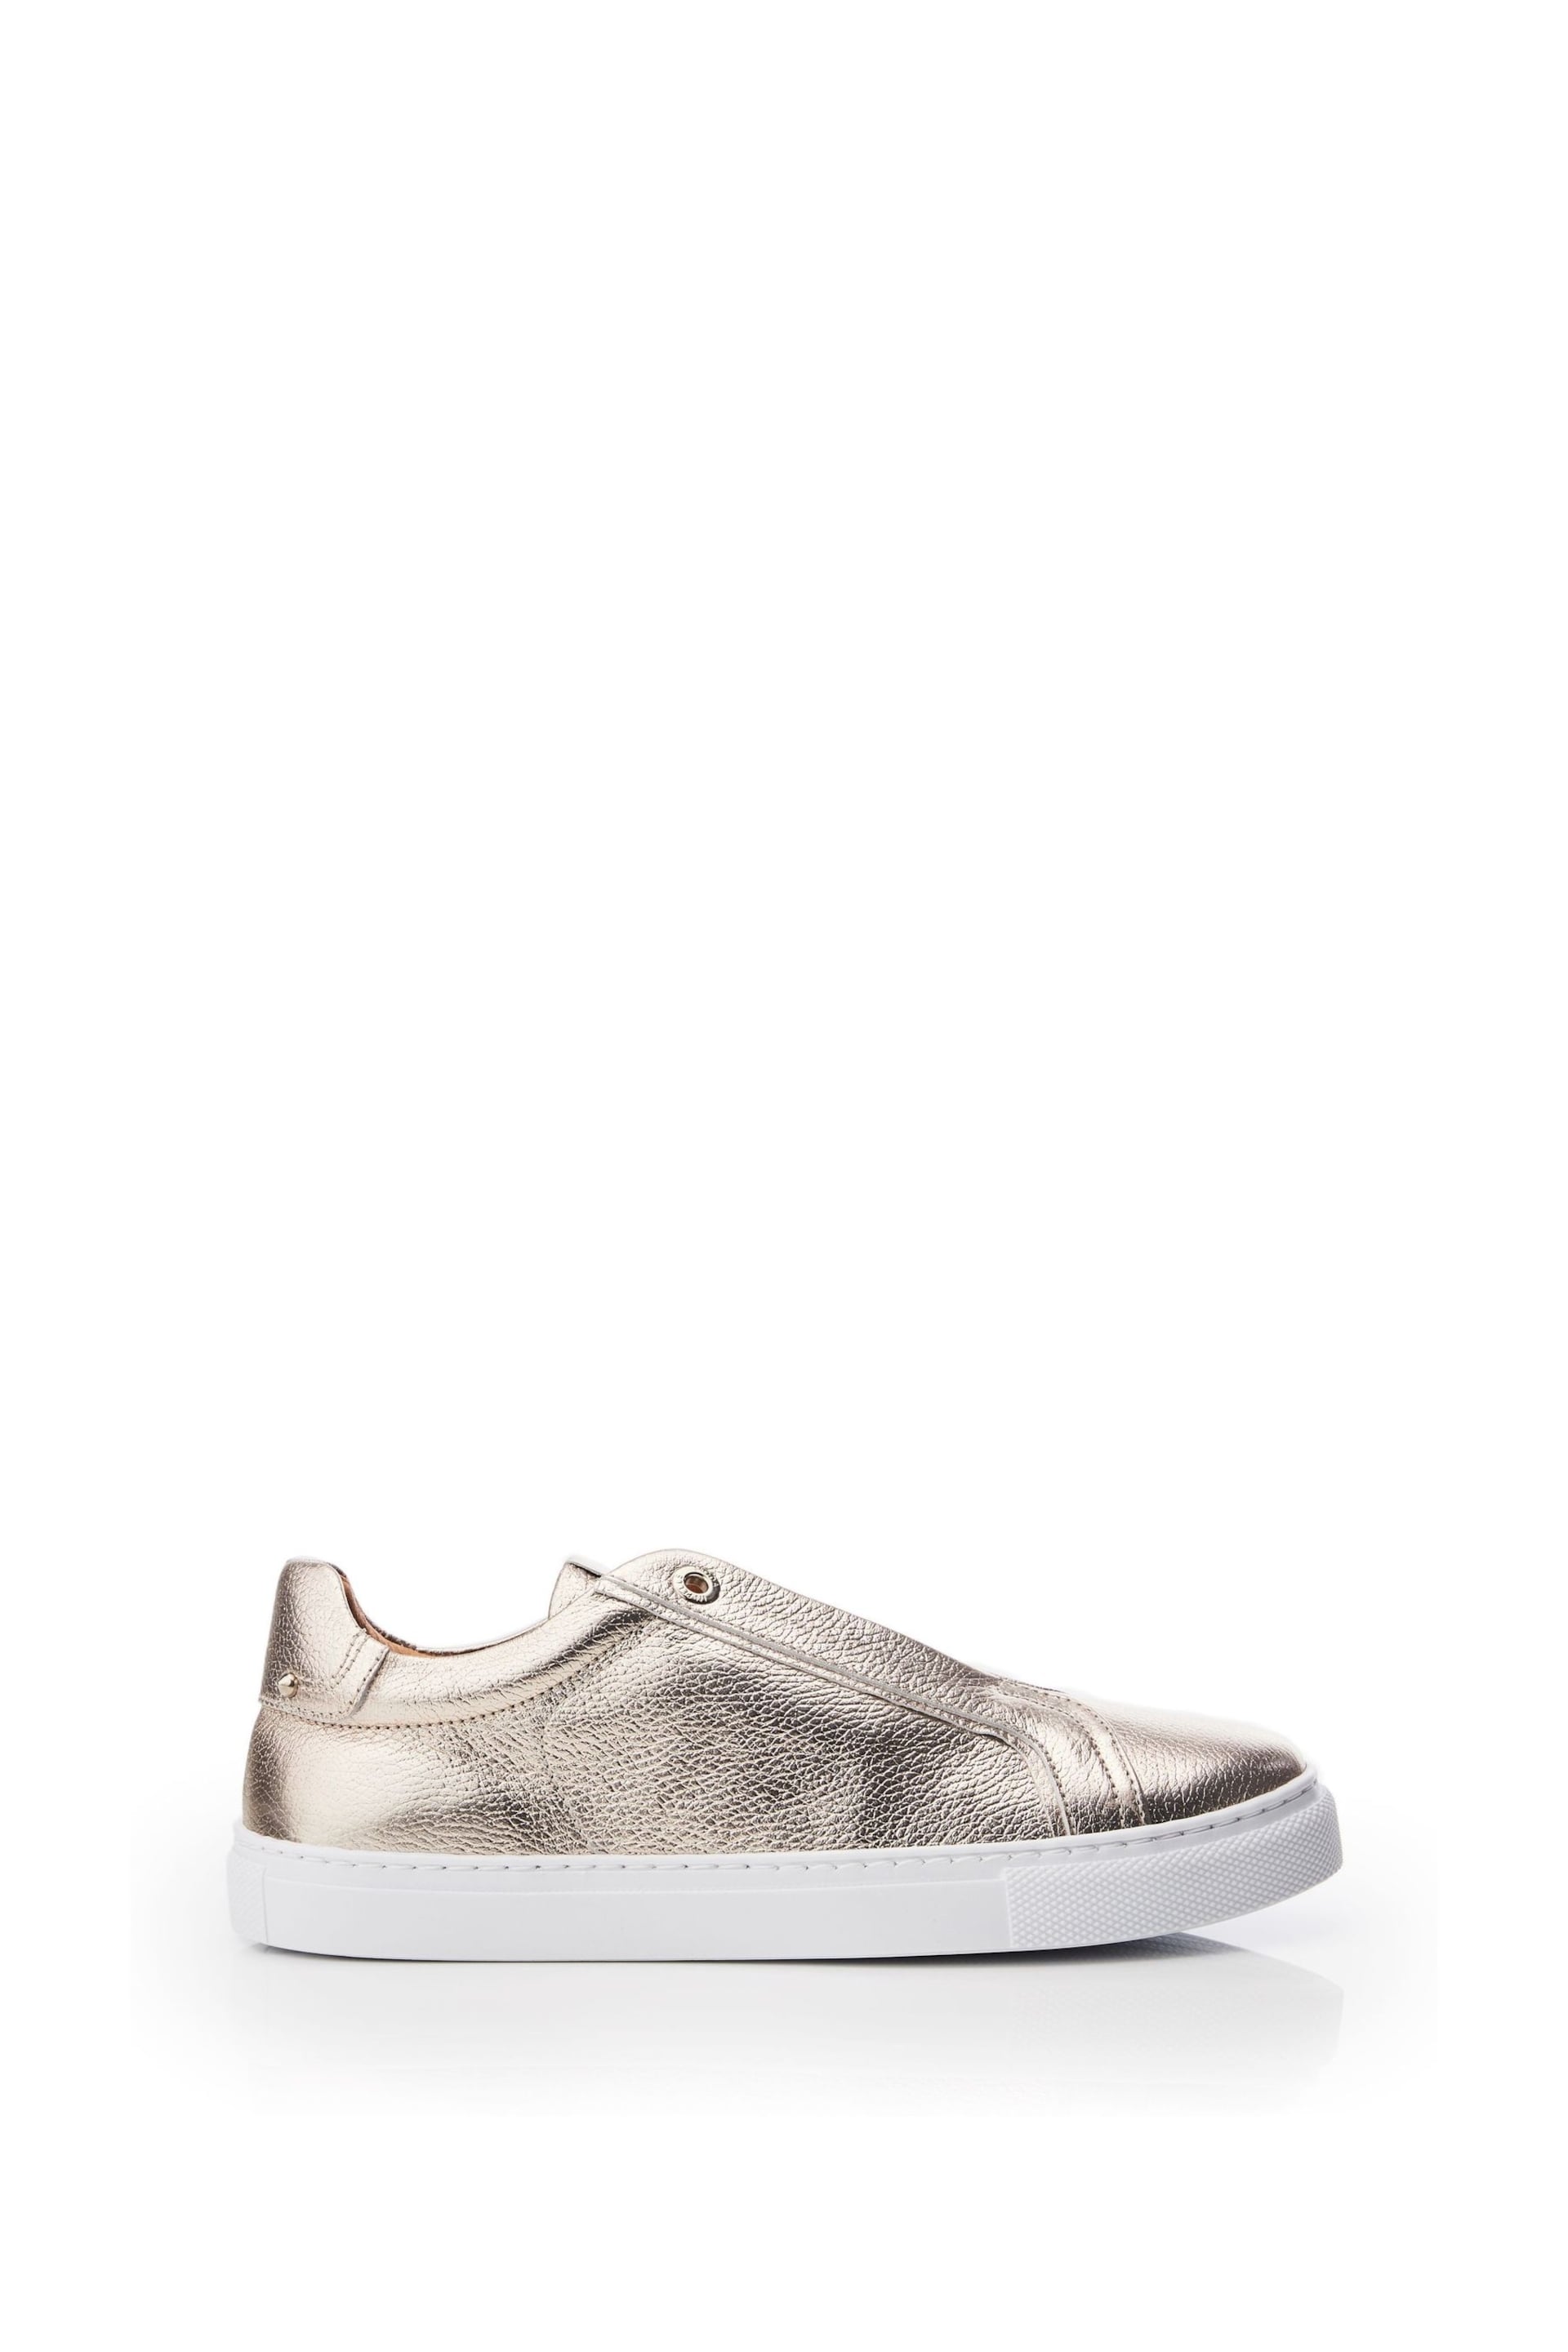 Moda in Pelle Bencina Slip On White Trainers with Elastic - Image 1 of 4